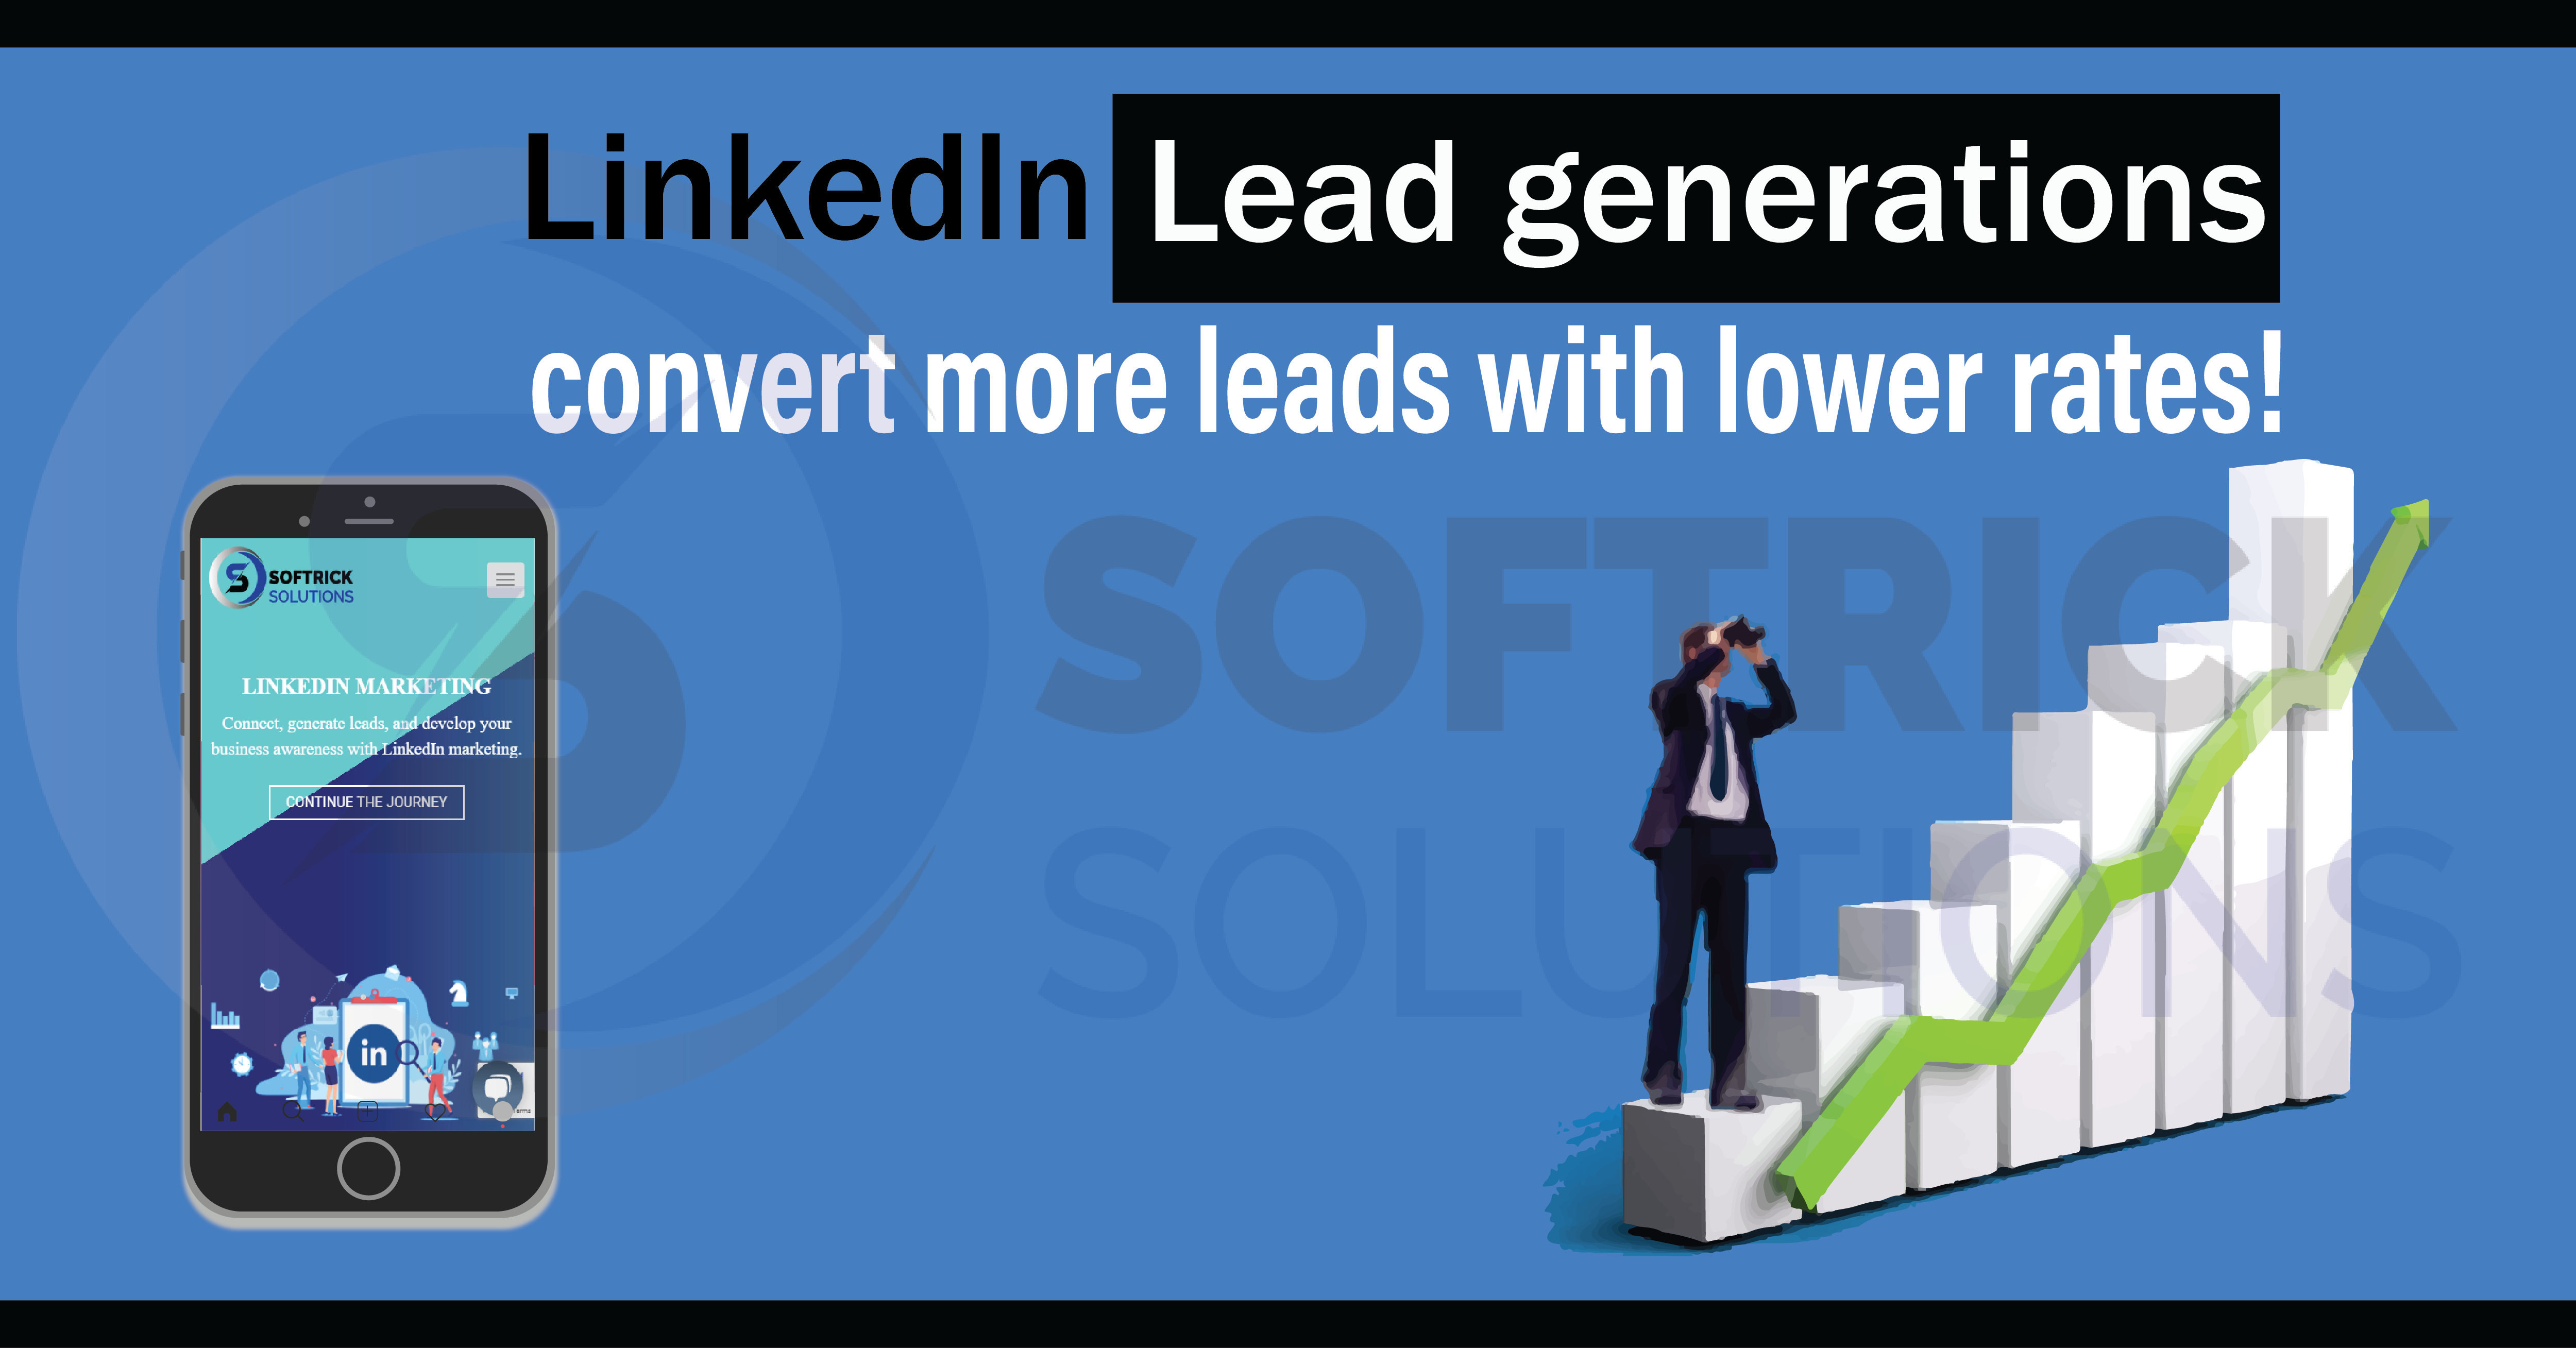 LinkedIn lead generations convert more leads with lower rates